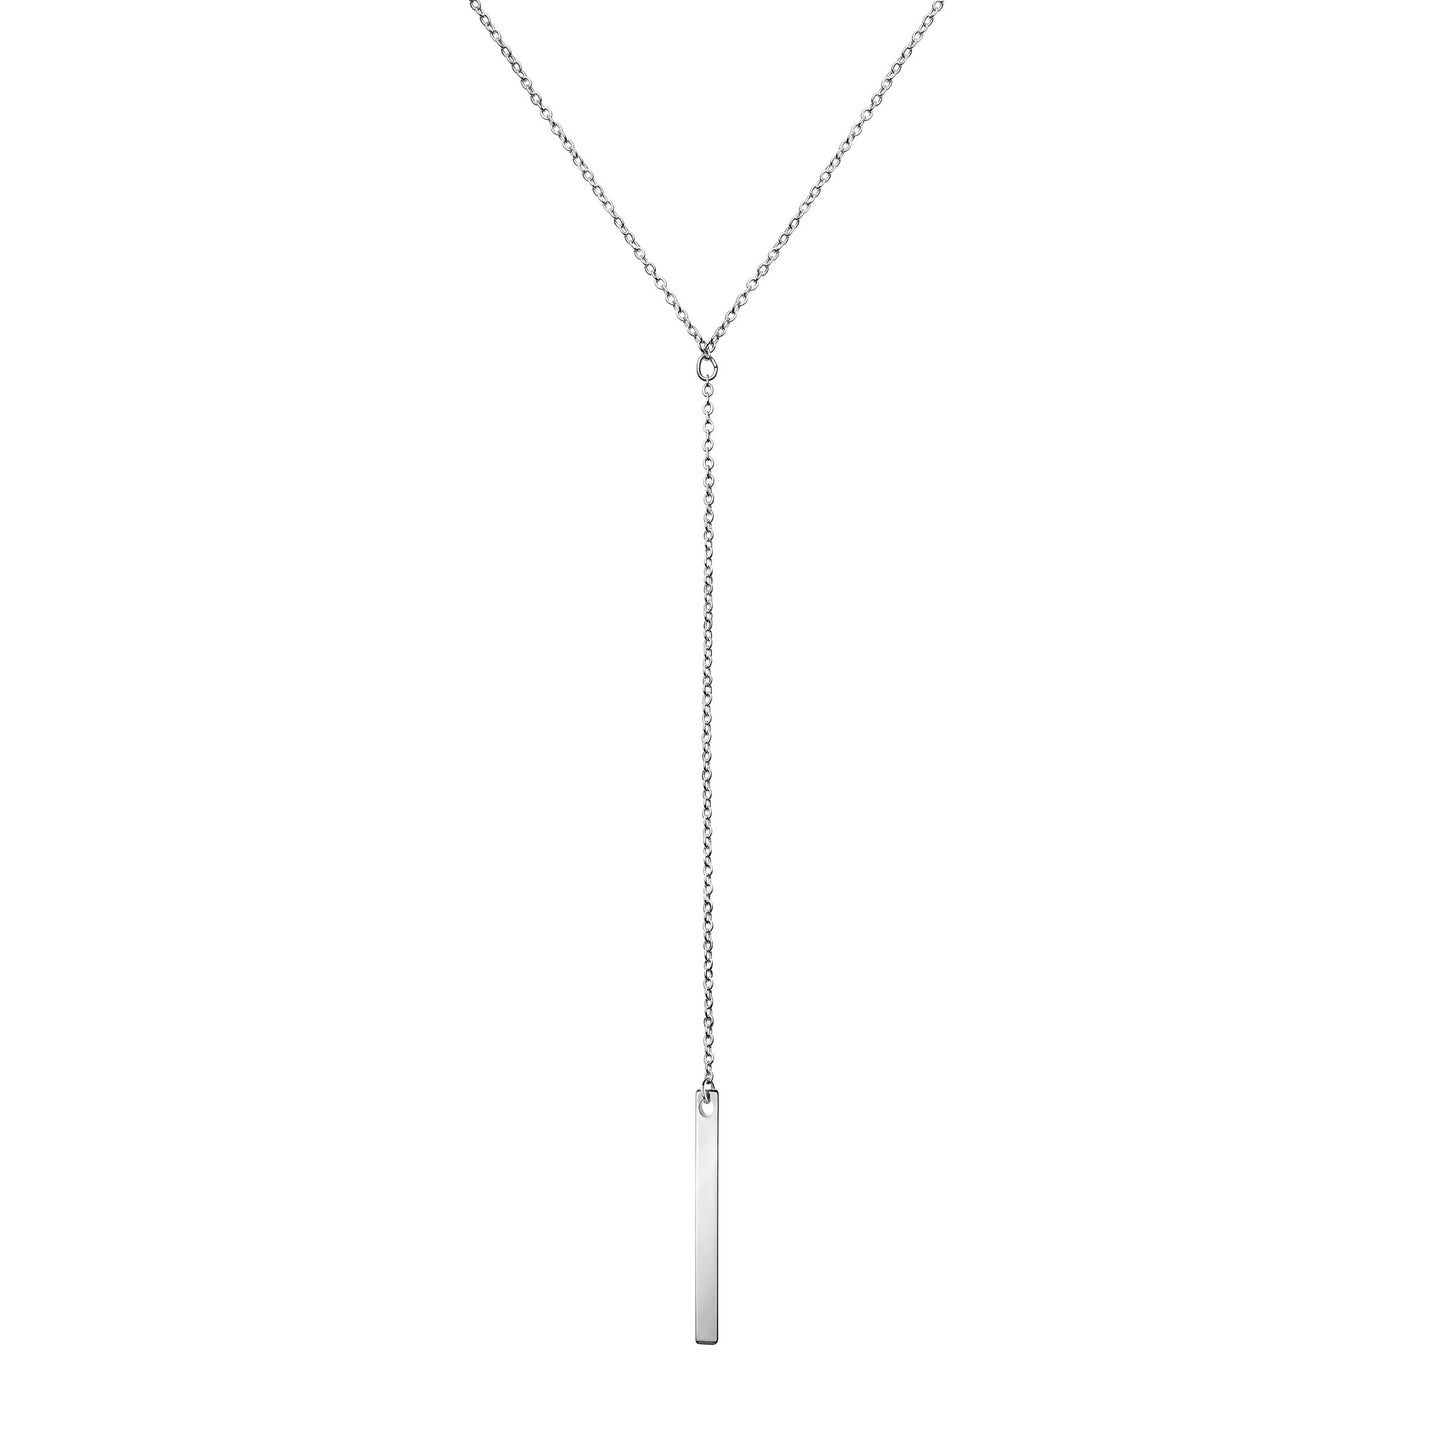 Brinley Personalized Lariat Necklace